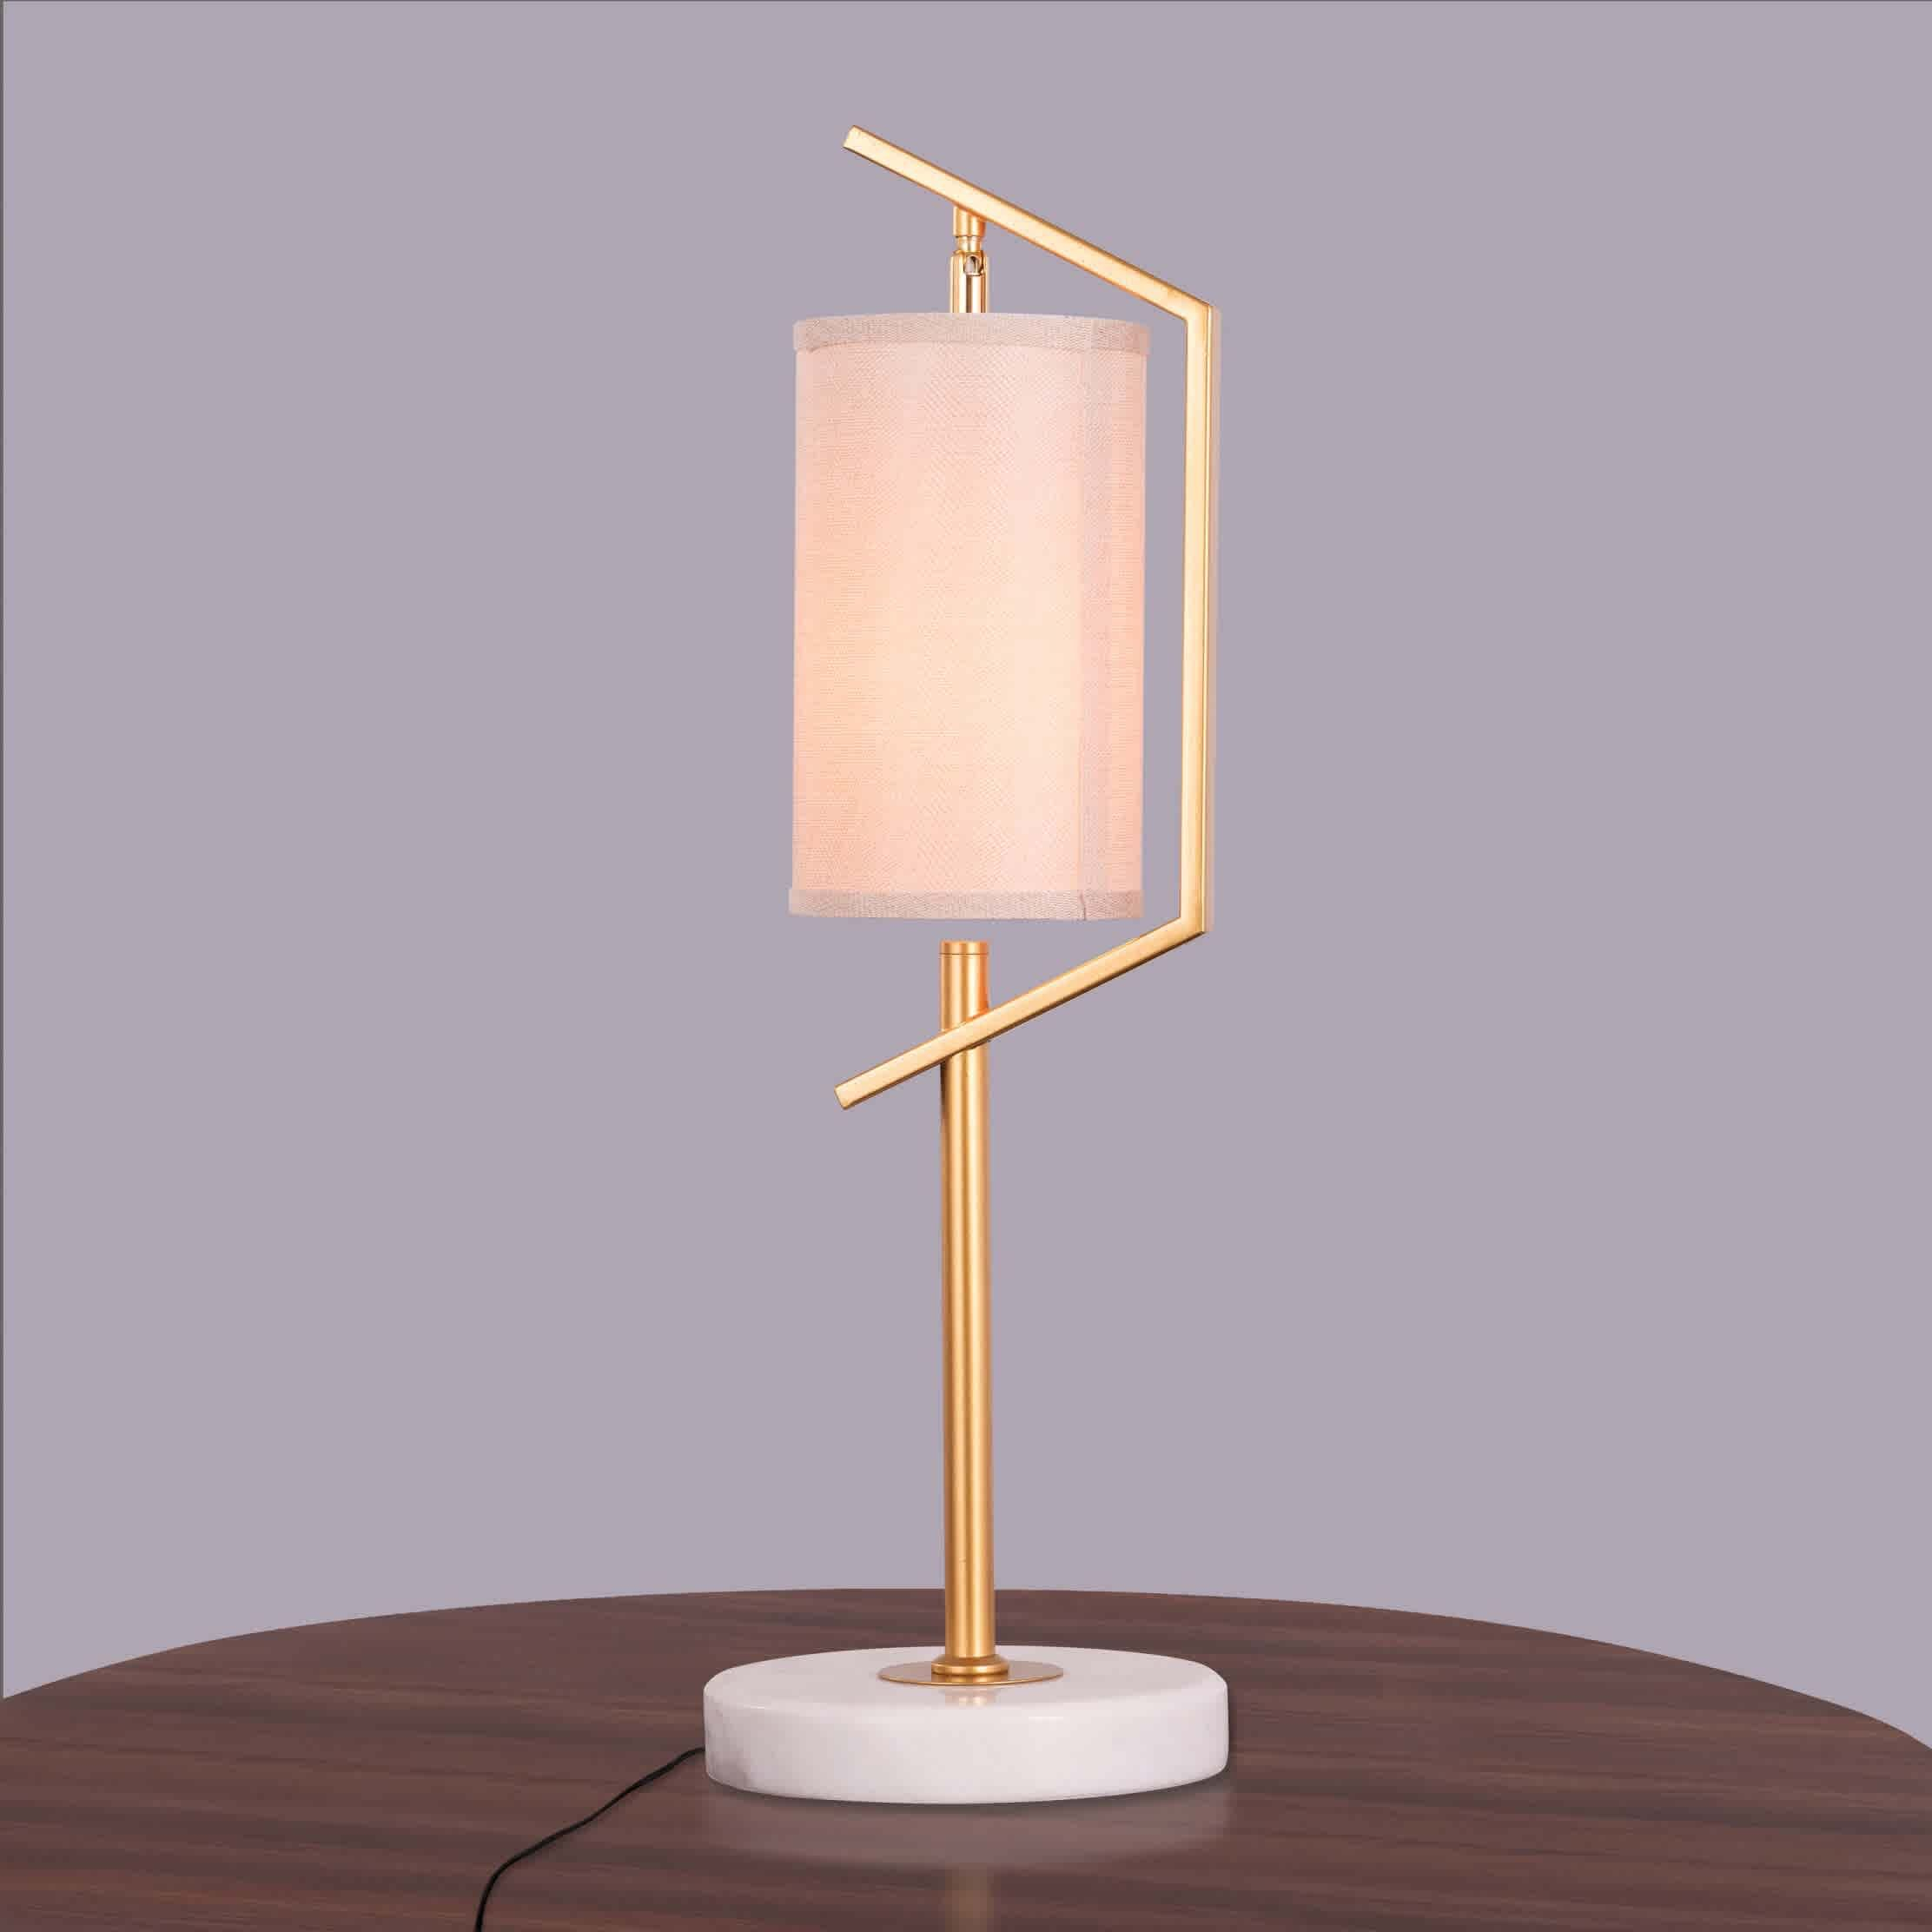 Effortless Table Lamp Table Lamp Hanging Lights Pendant inside sizing 2224 X 2224